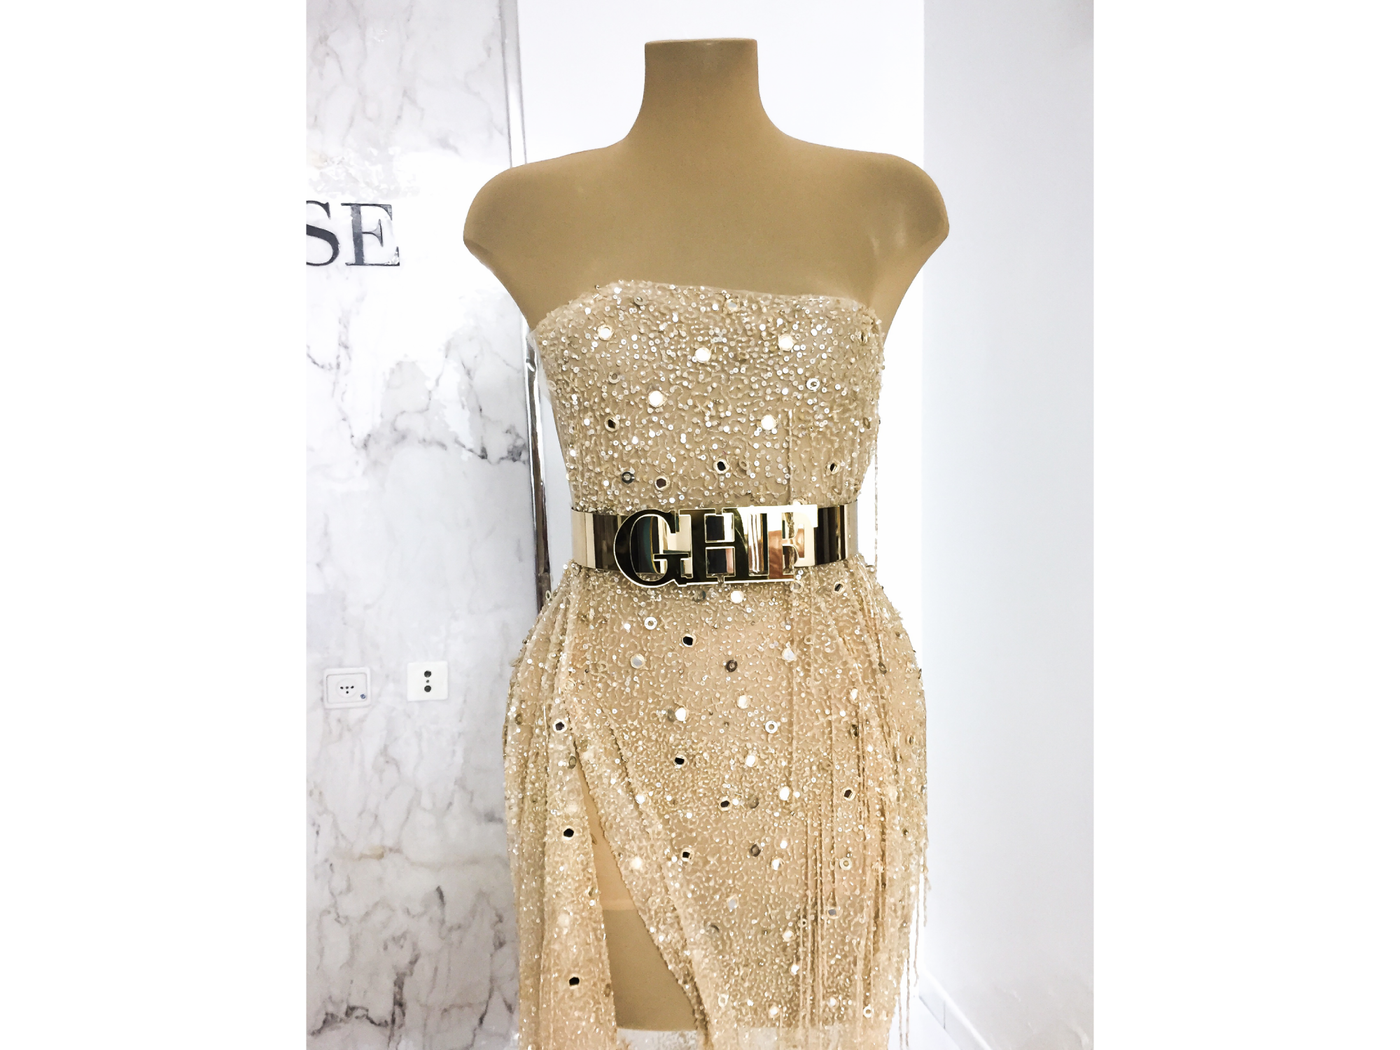 beaded dress made with handmade fringes gold lace